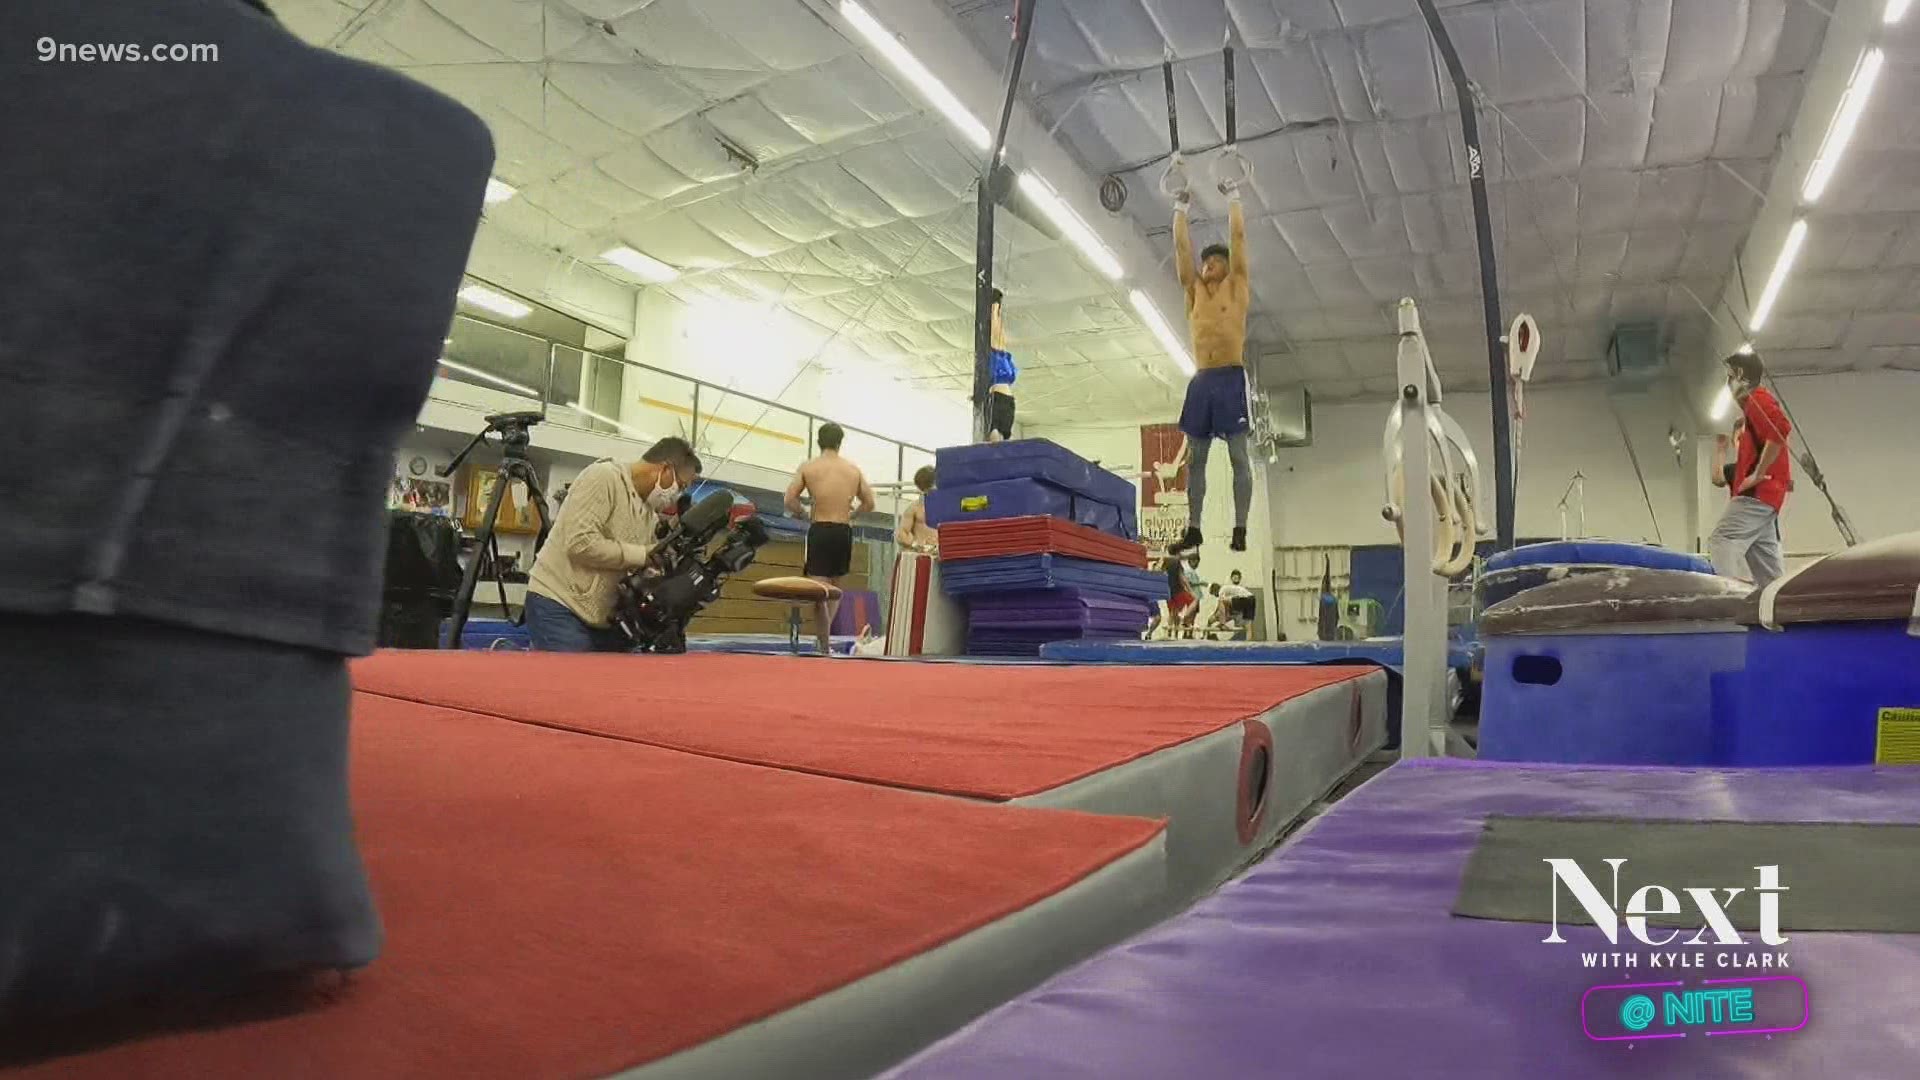 A gym in Wheat Ridge has three generations of Olympic gymnasts, including one who’s competing at the Games in Tokyo.